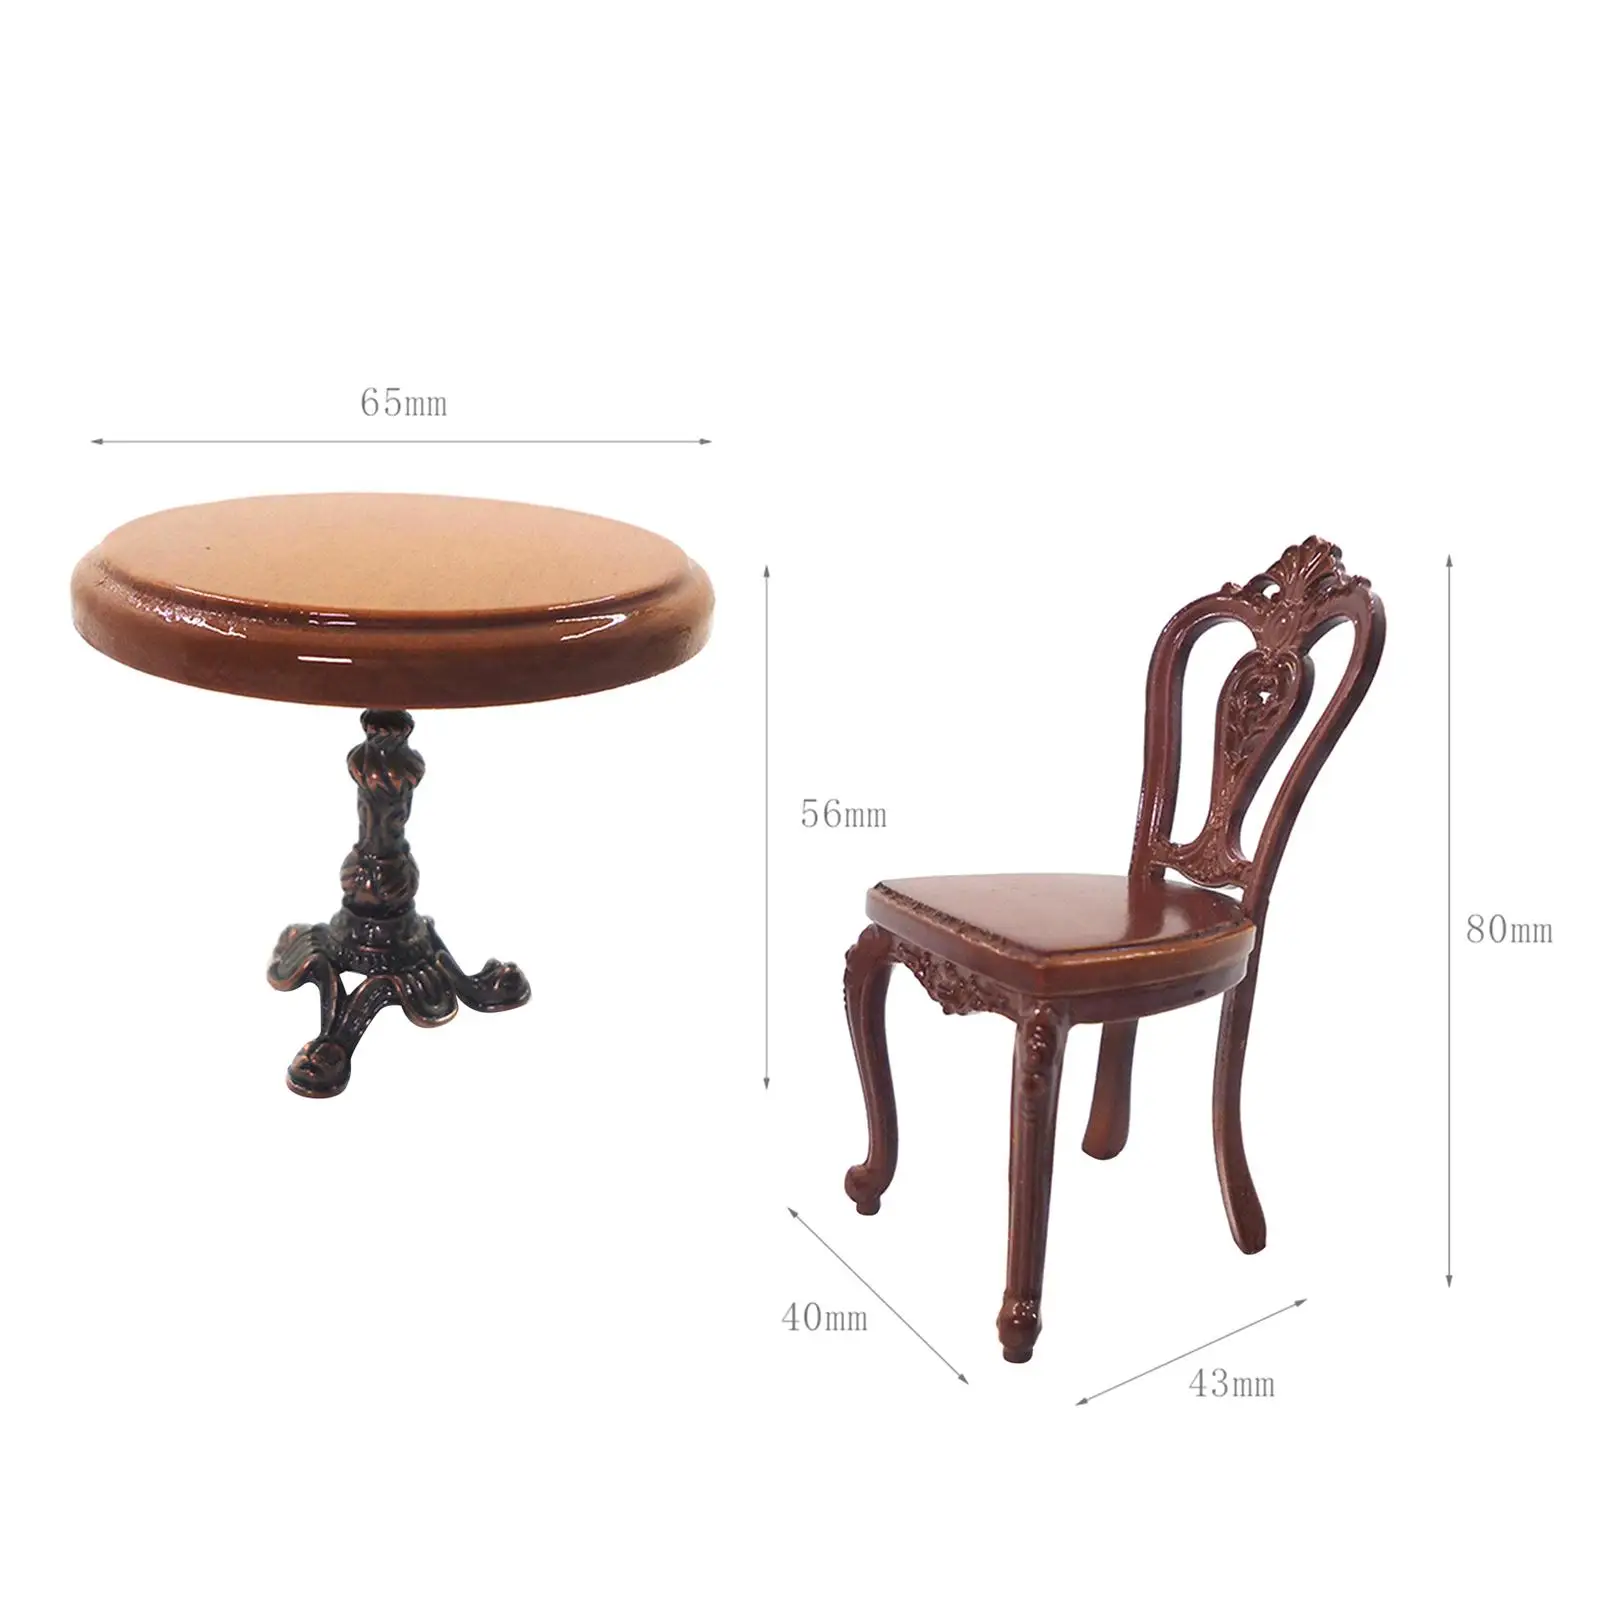 3Pcs 1:12 Mini Wooden Round Table and Chairs Model Accessories Toys Dining Room Living Room Scenery Supplies Decoration